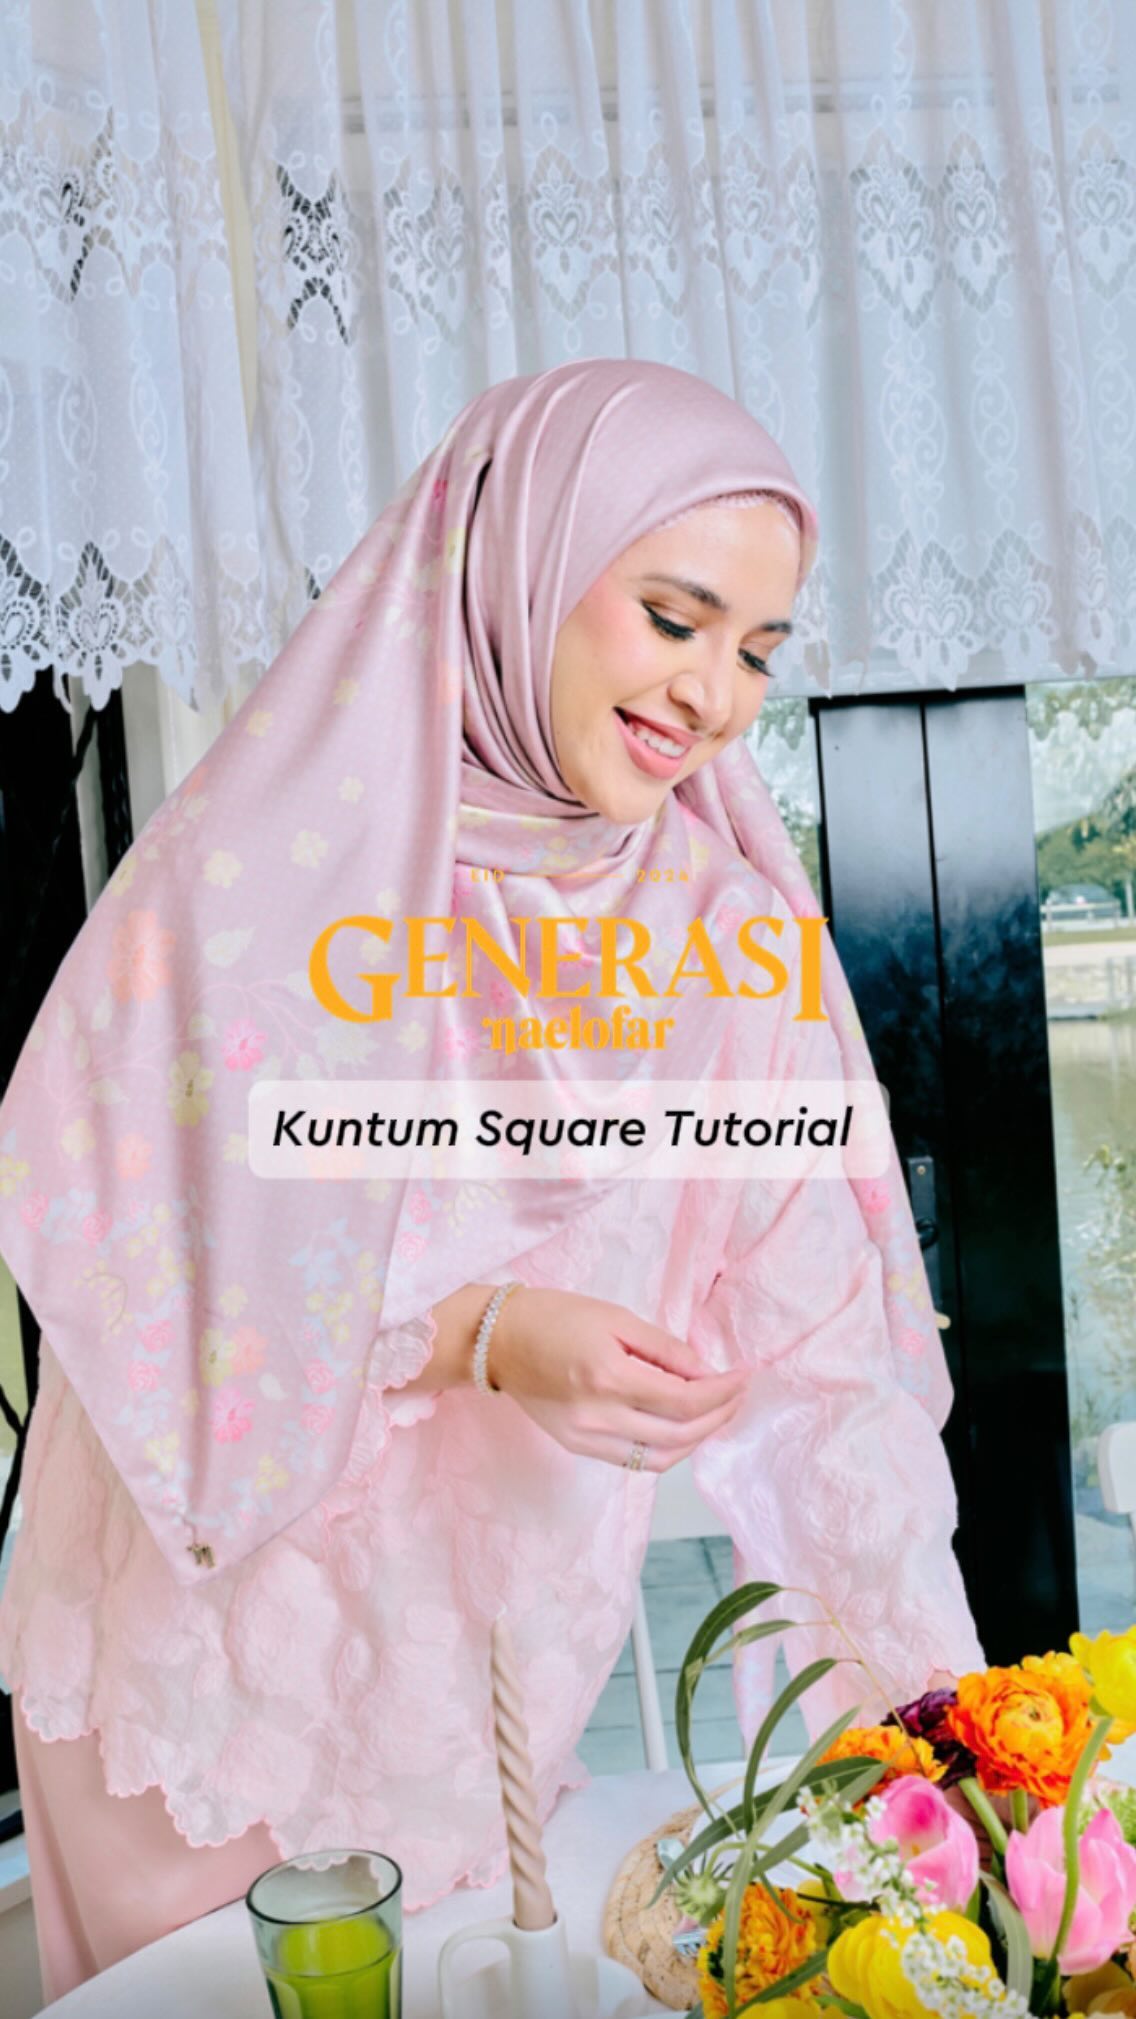 Quick and effortless raya hijab tutorial for styling the Kuntum Square. Perfect for a stylish and hassle-free look! ✨🧕🏻 #hijabtutorial #GenerasiNaelofar #RayaCollection